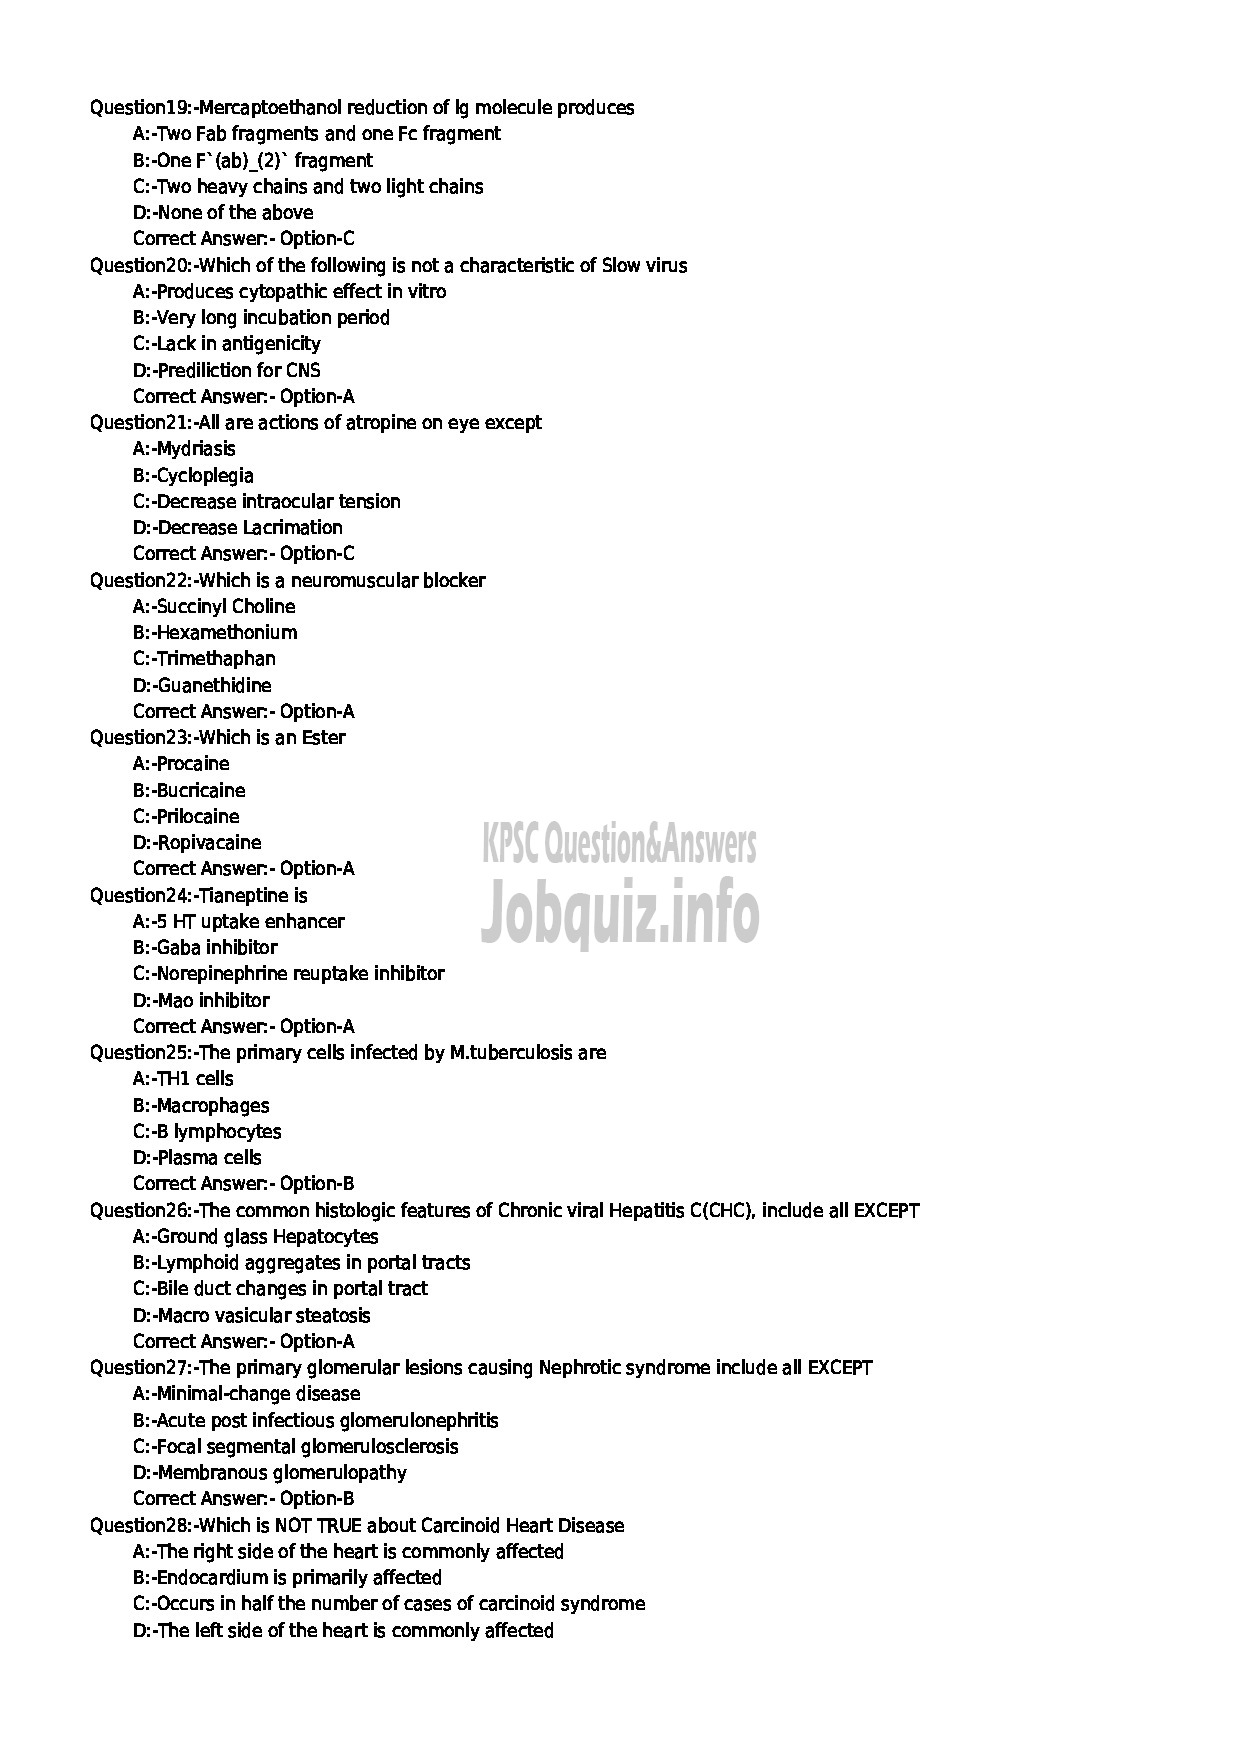 Kerala PSC Question Paper - Assistant Surgeon / casuality Medicine NCA Medical Education-3